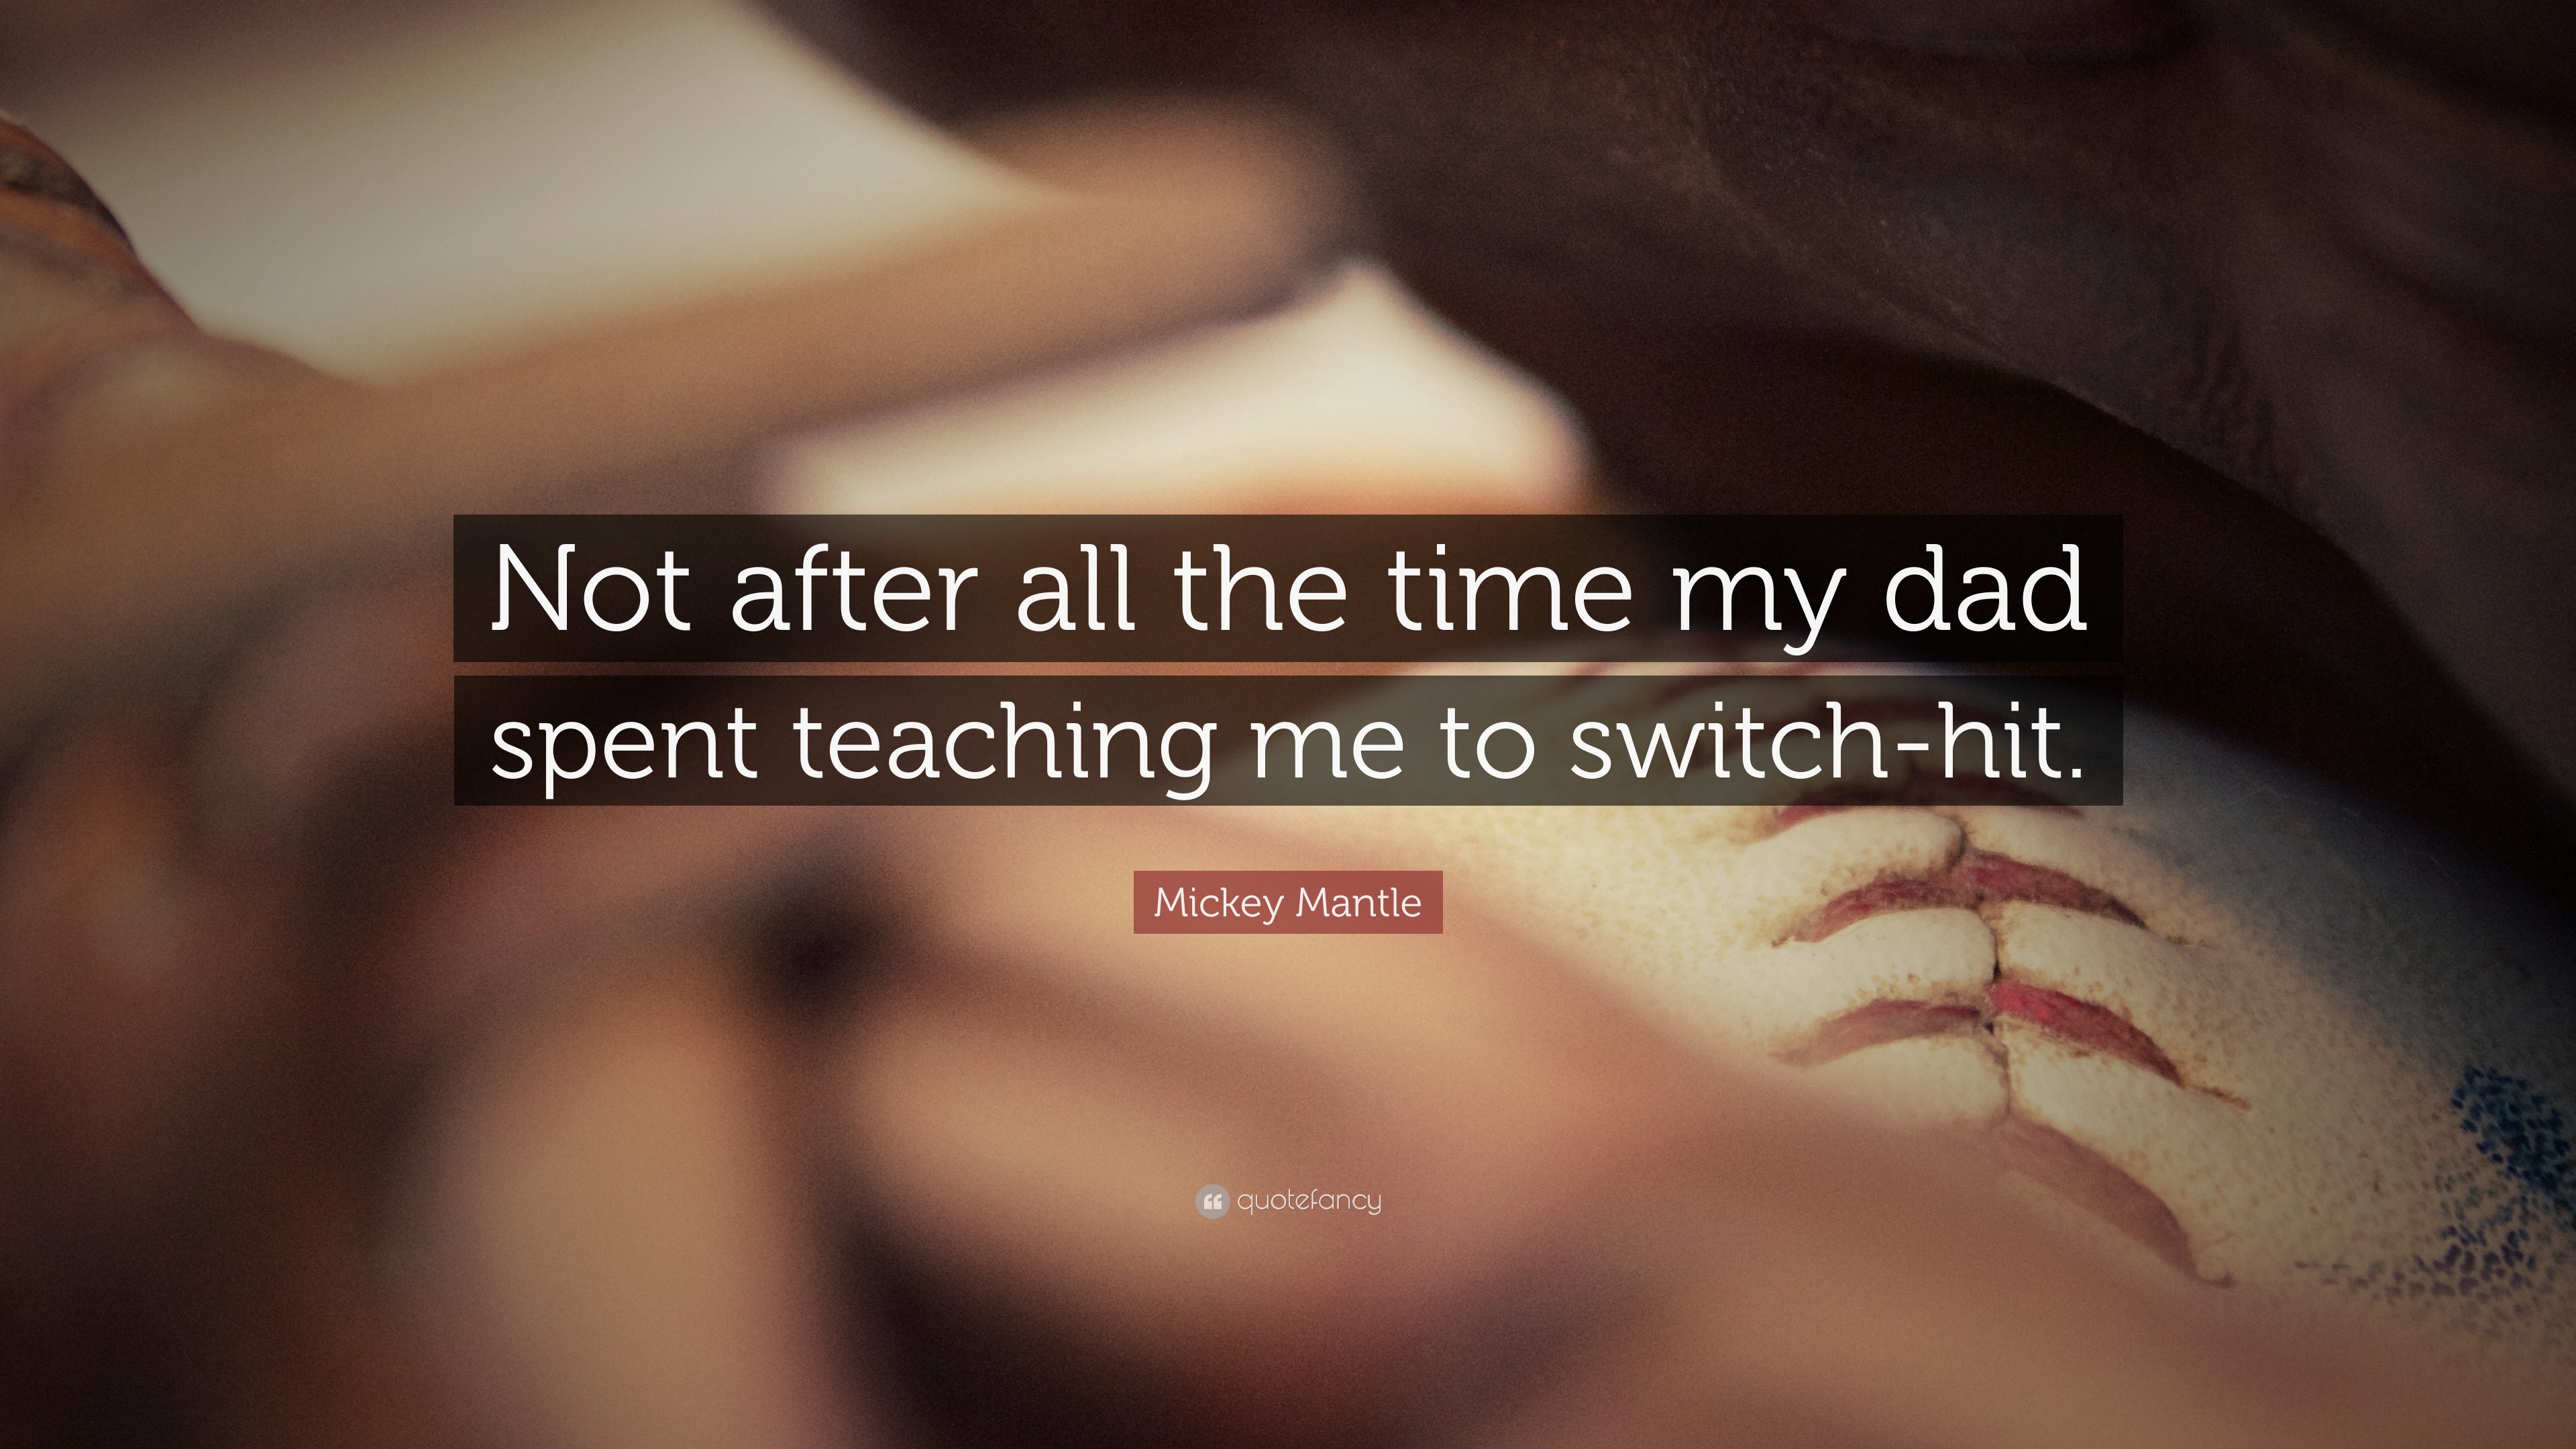 Mickey Mantle Quote: “Not after all the time my dad spent teaching me to